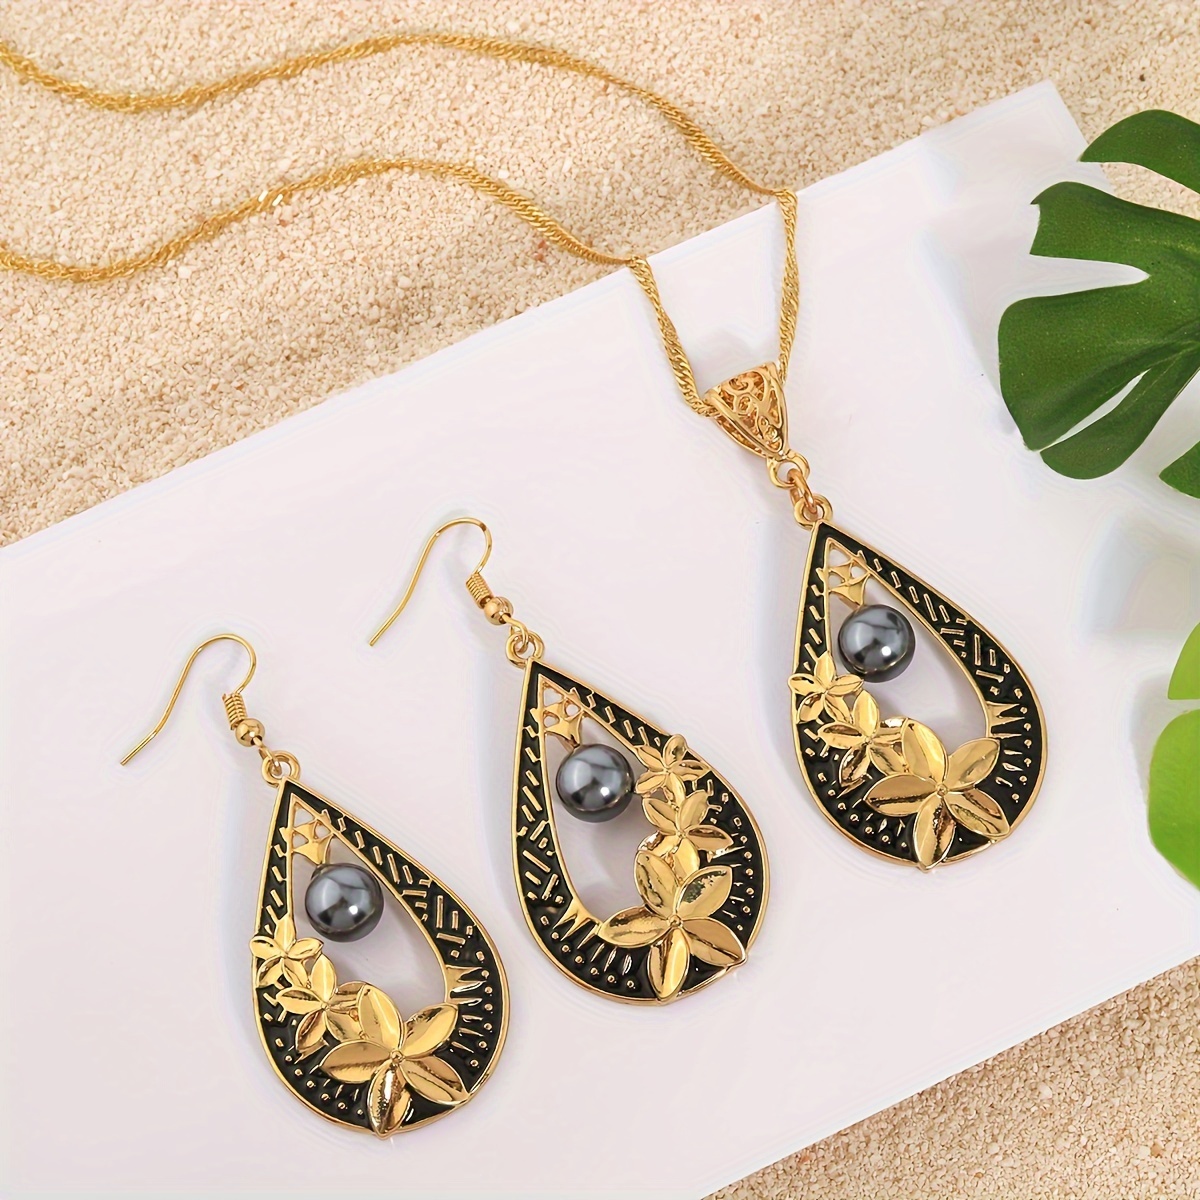 

Hawaiian Style Black Enamel Teardrop Bead Necklace And Earring Jewelry Set, Vacation-themed Floral Drop Accessories For Women